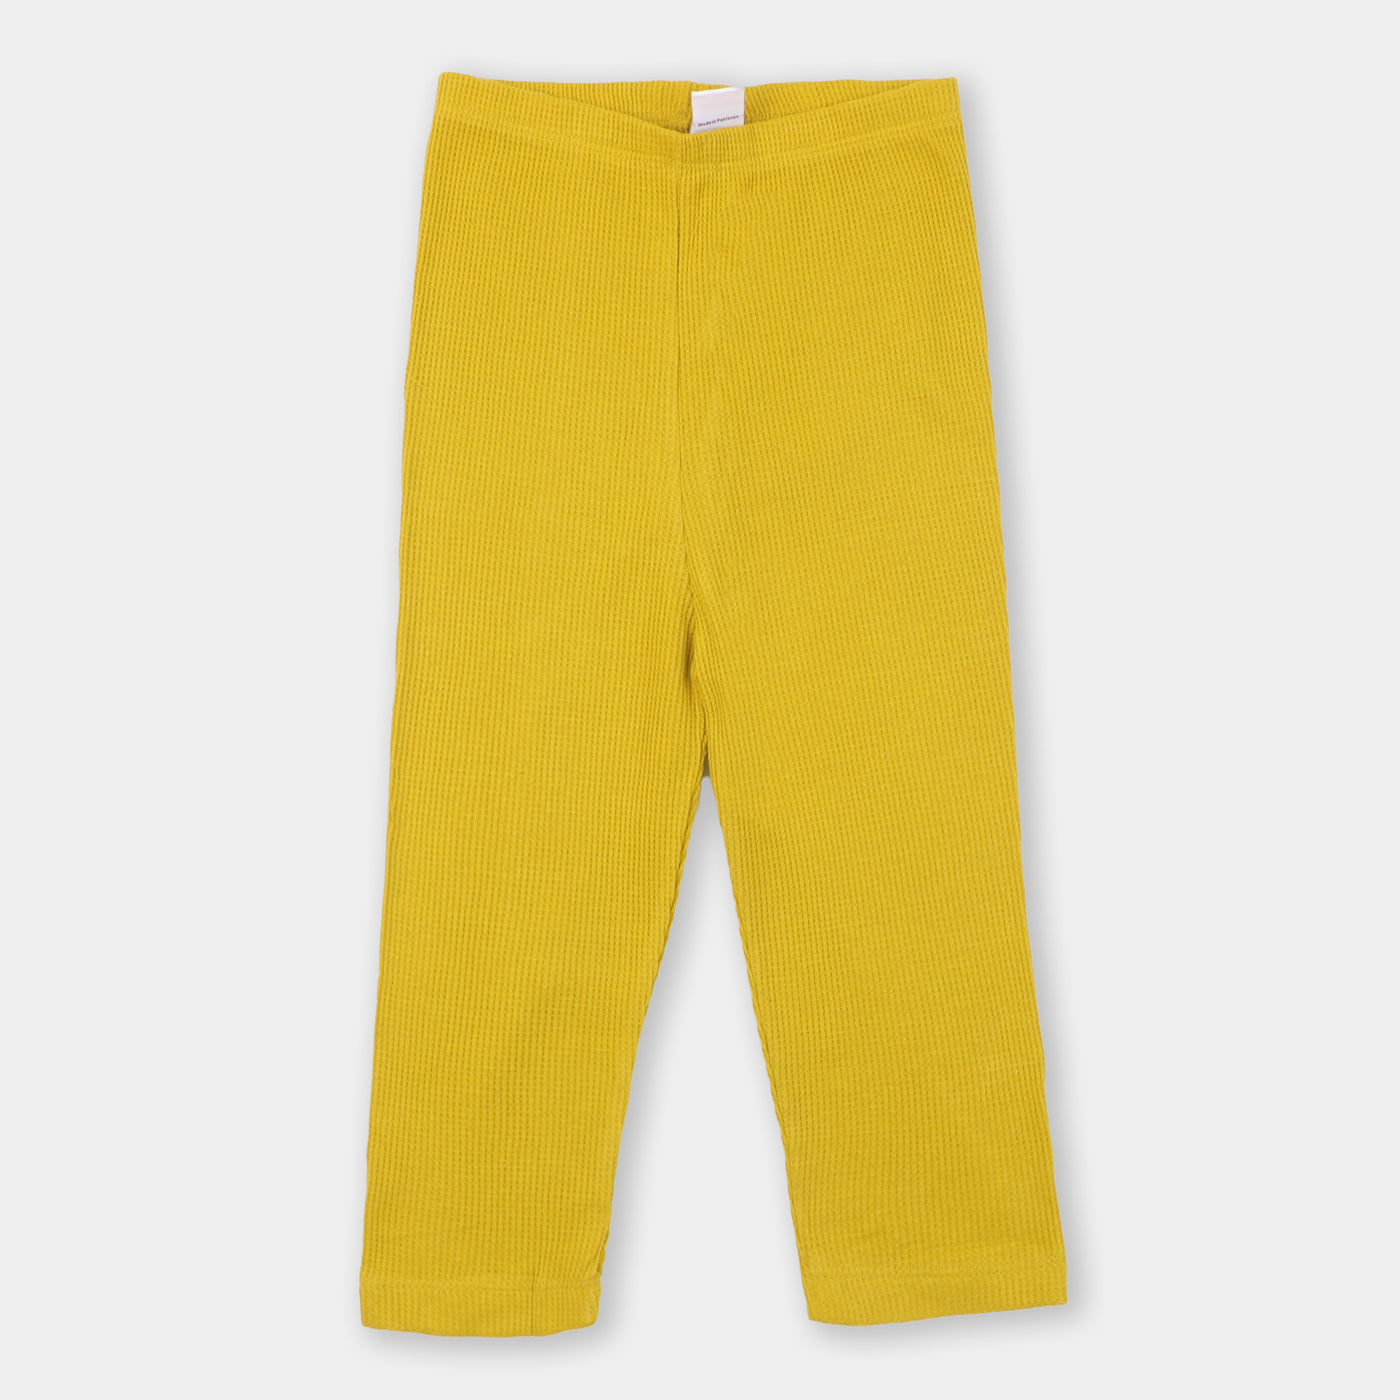 Unisex Thermal Suit - Yellow